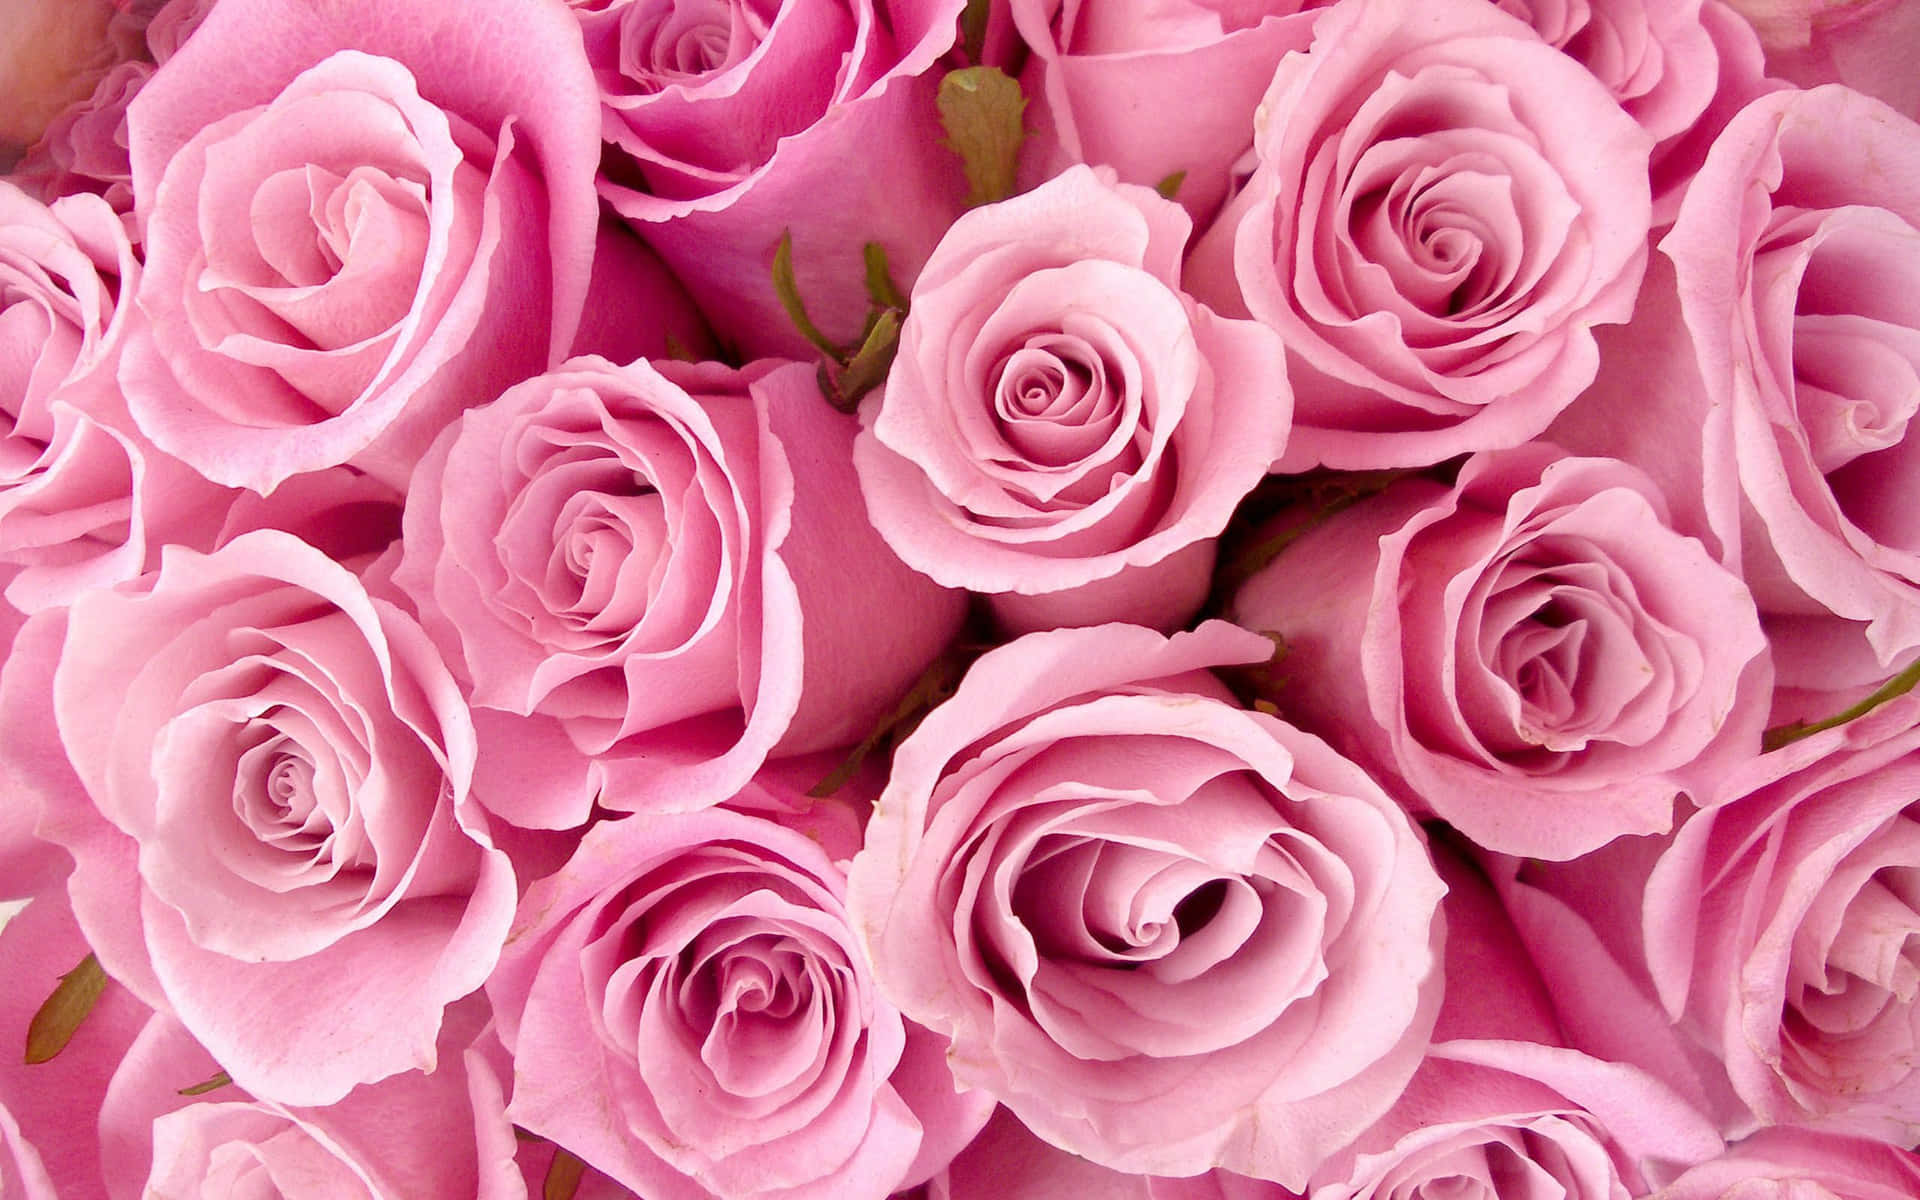 Pretty in Pink and Always Girly Wallpaper